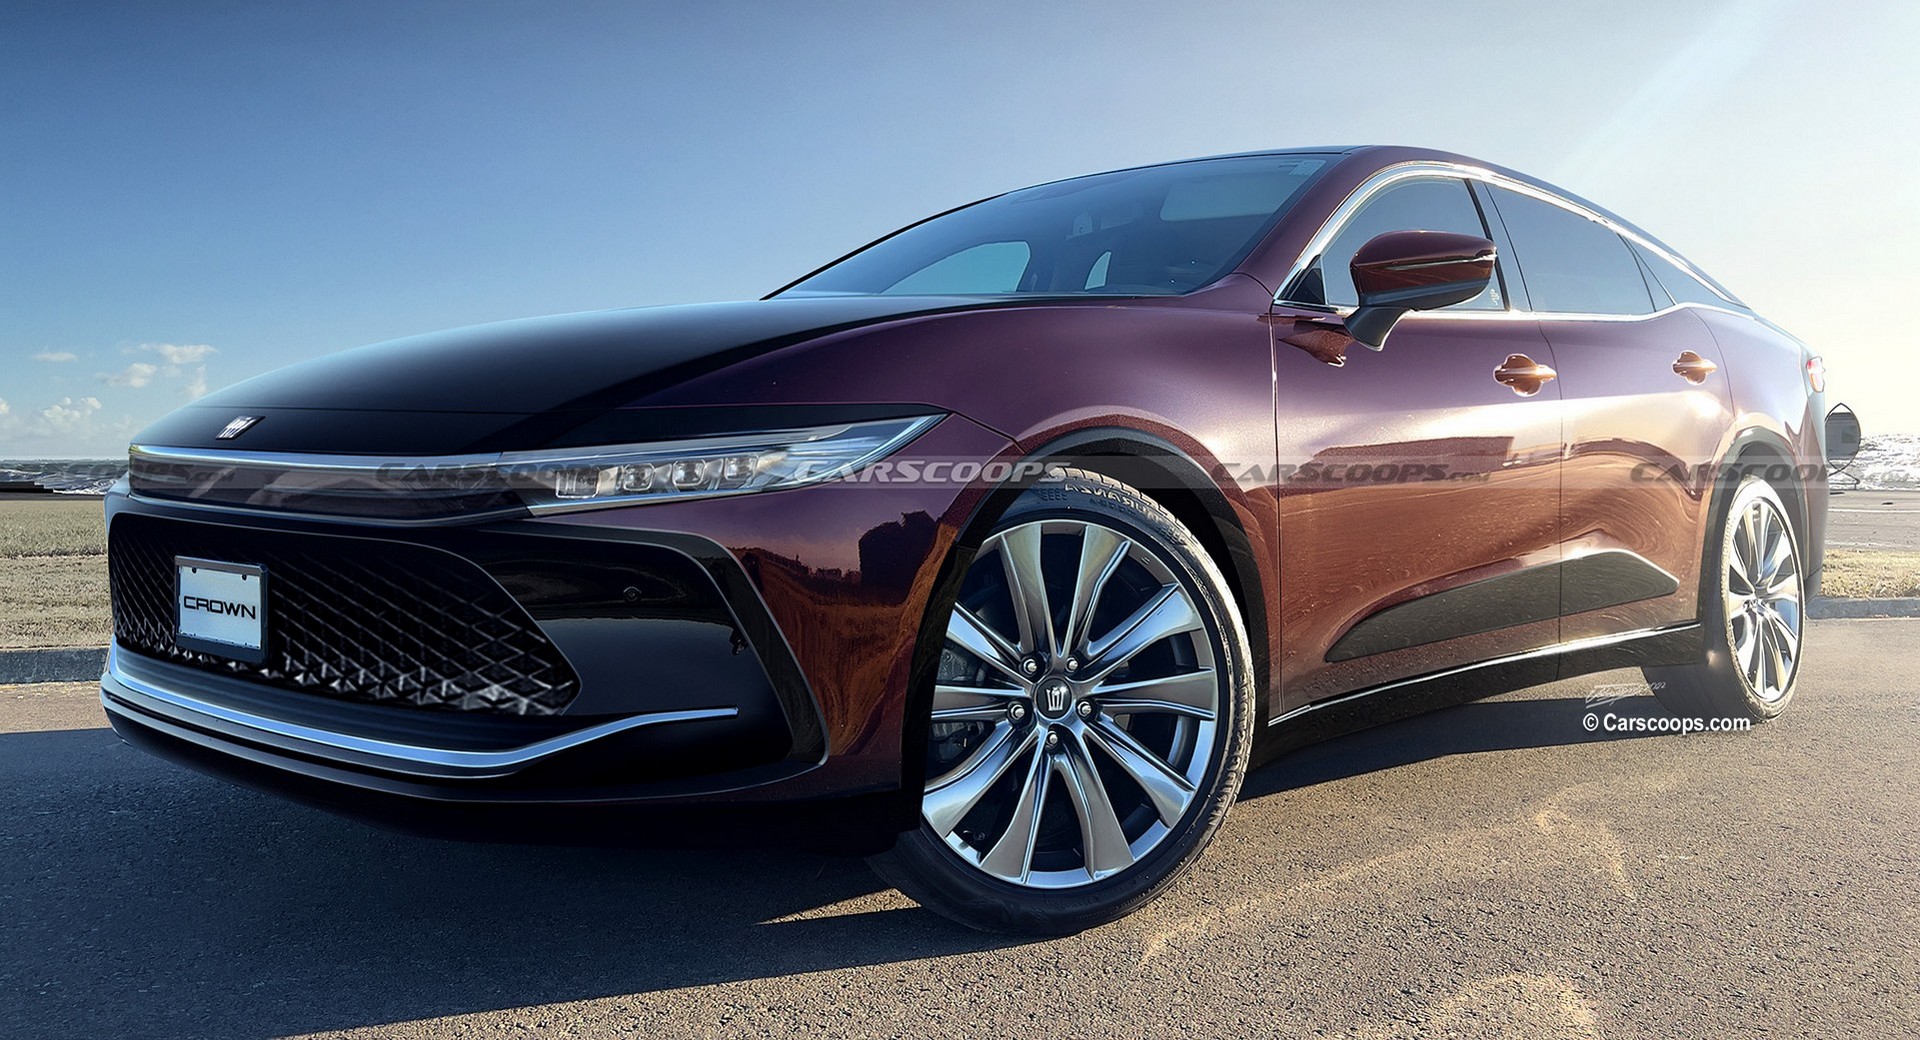 2023 Toyota Crown Up Close: What Exactly Am I Looking At?